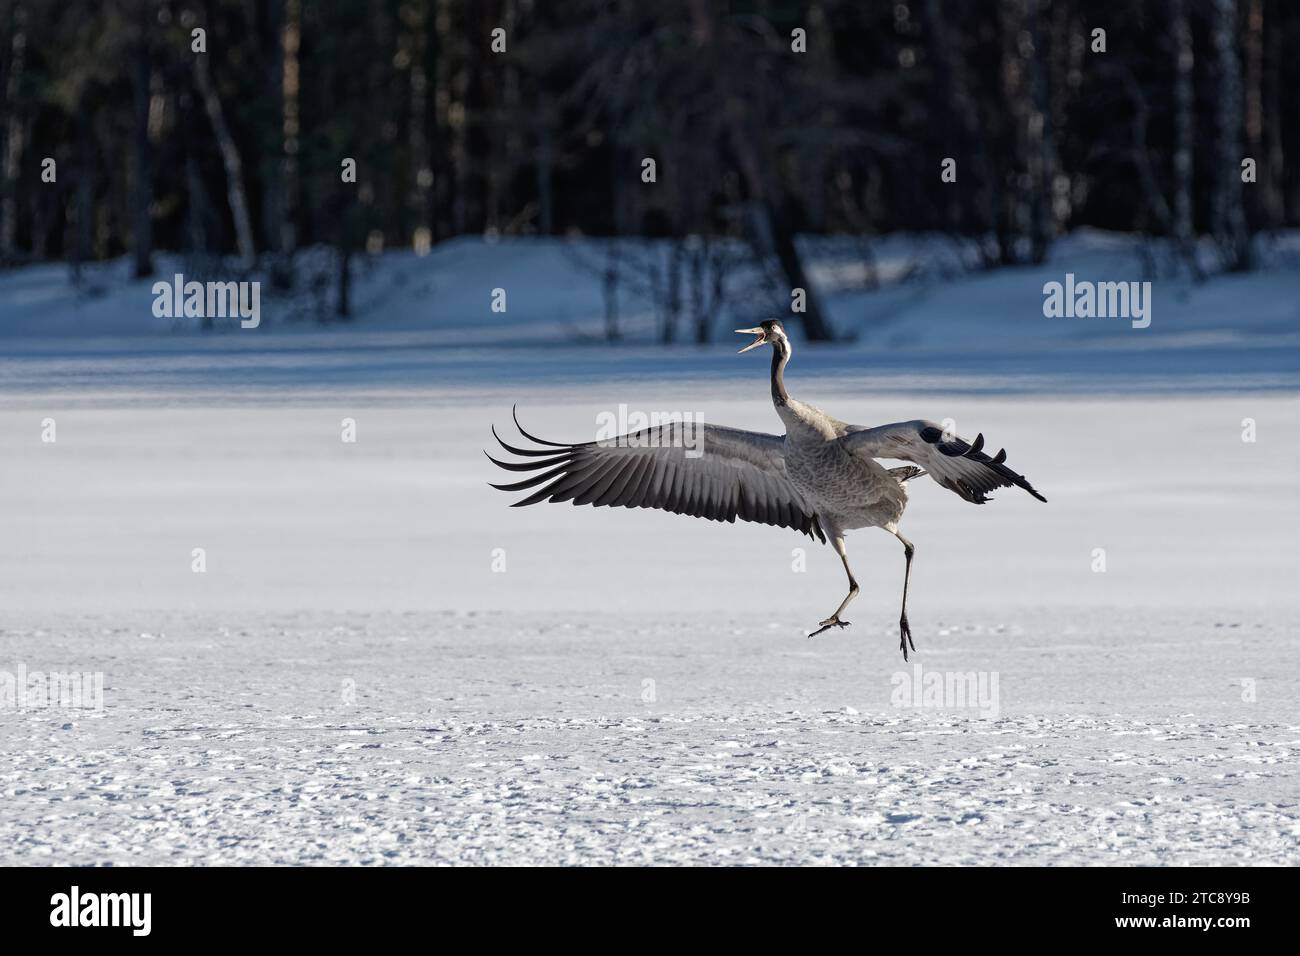 Crane (Grus grus) hopping with spread wings in the snow, beak open, winter, behind group of trees, Northern Finland, Finland Stock Photo